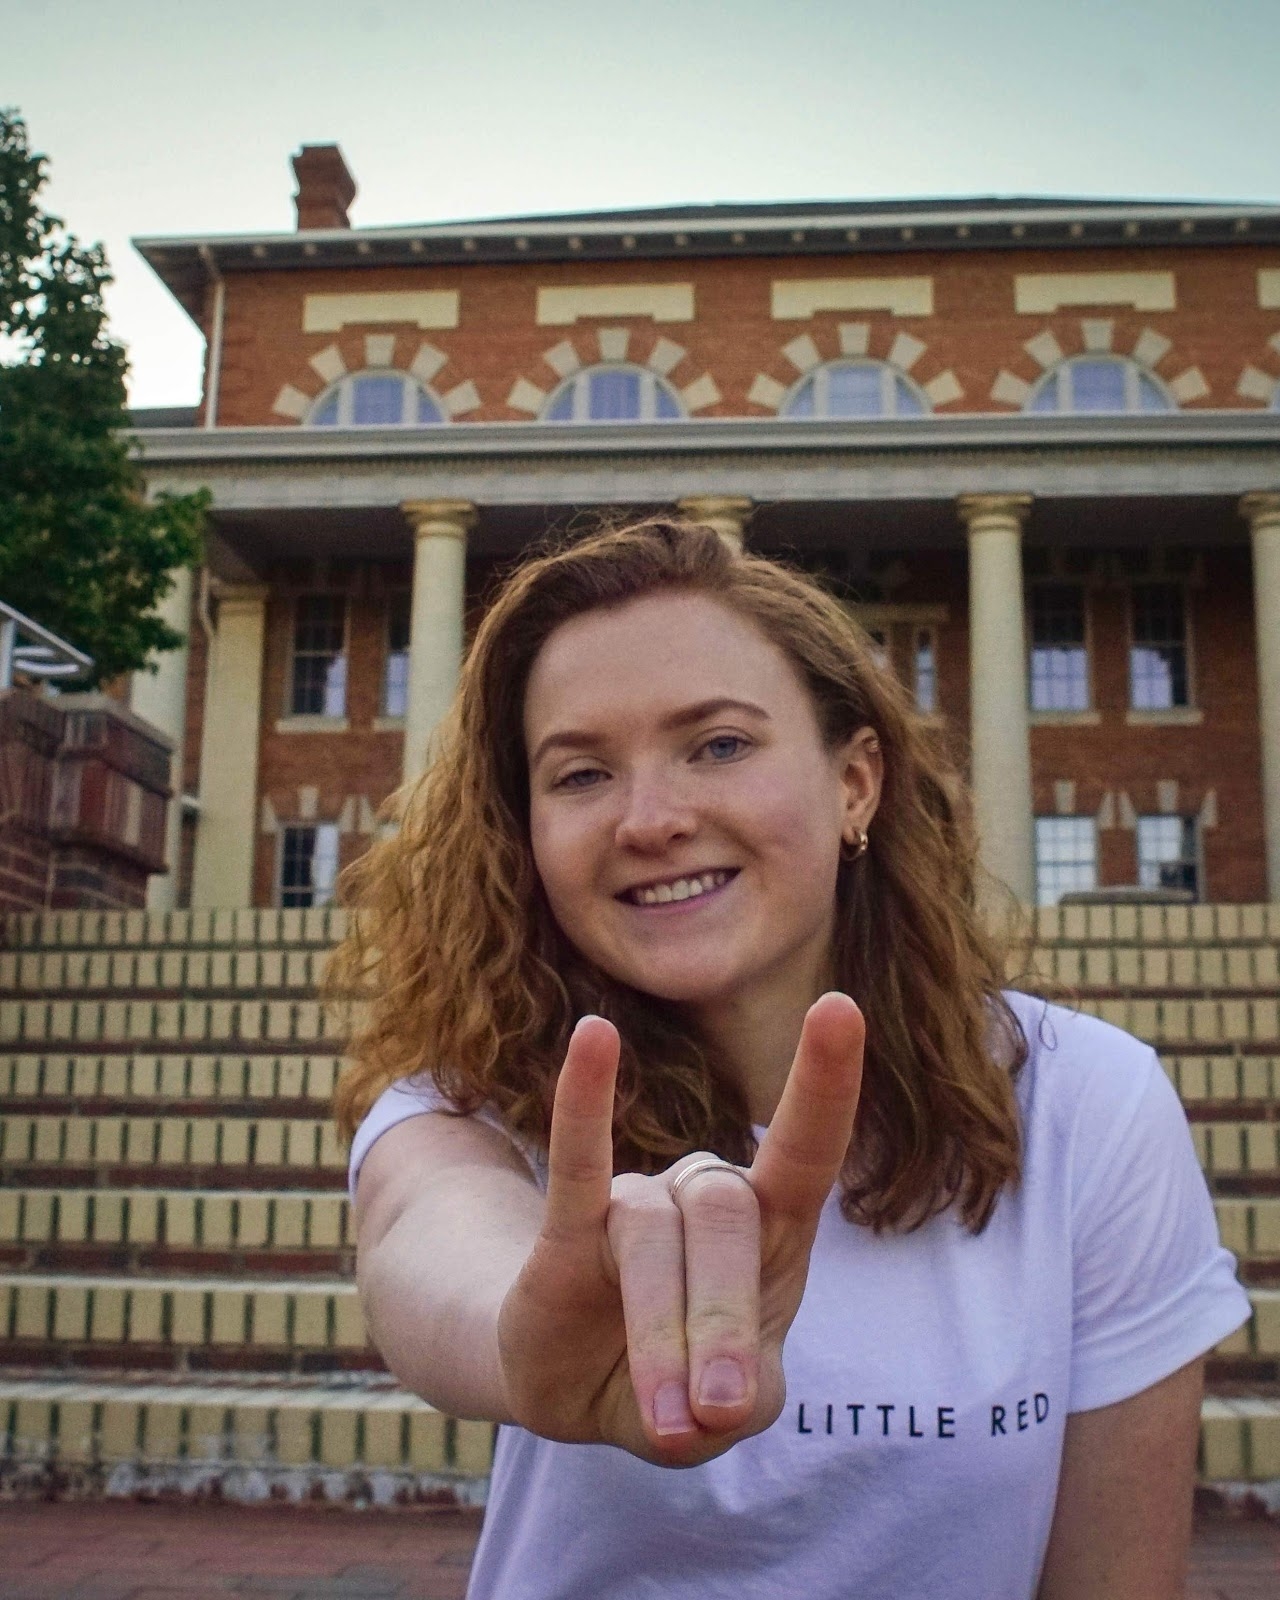 Lauren White makes a Wolfie sign with her hand in front of a building on campus